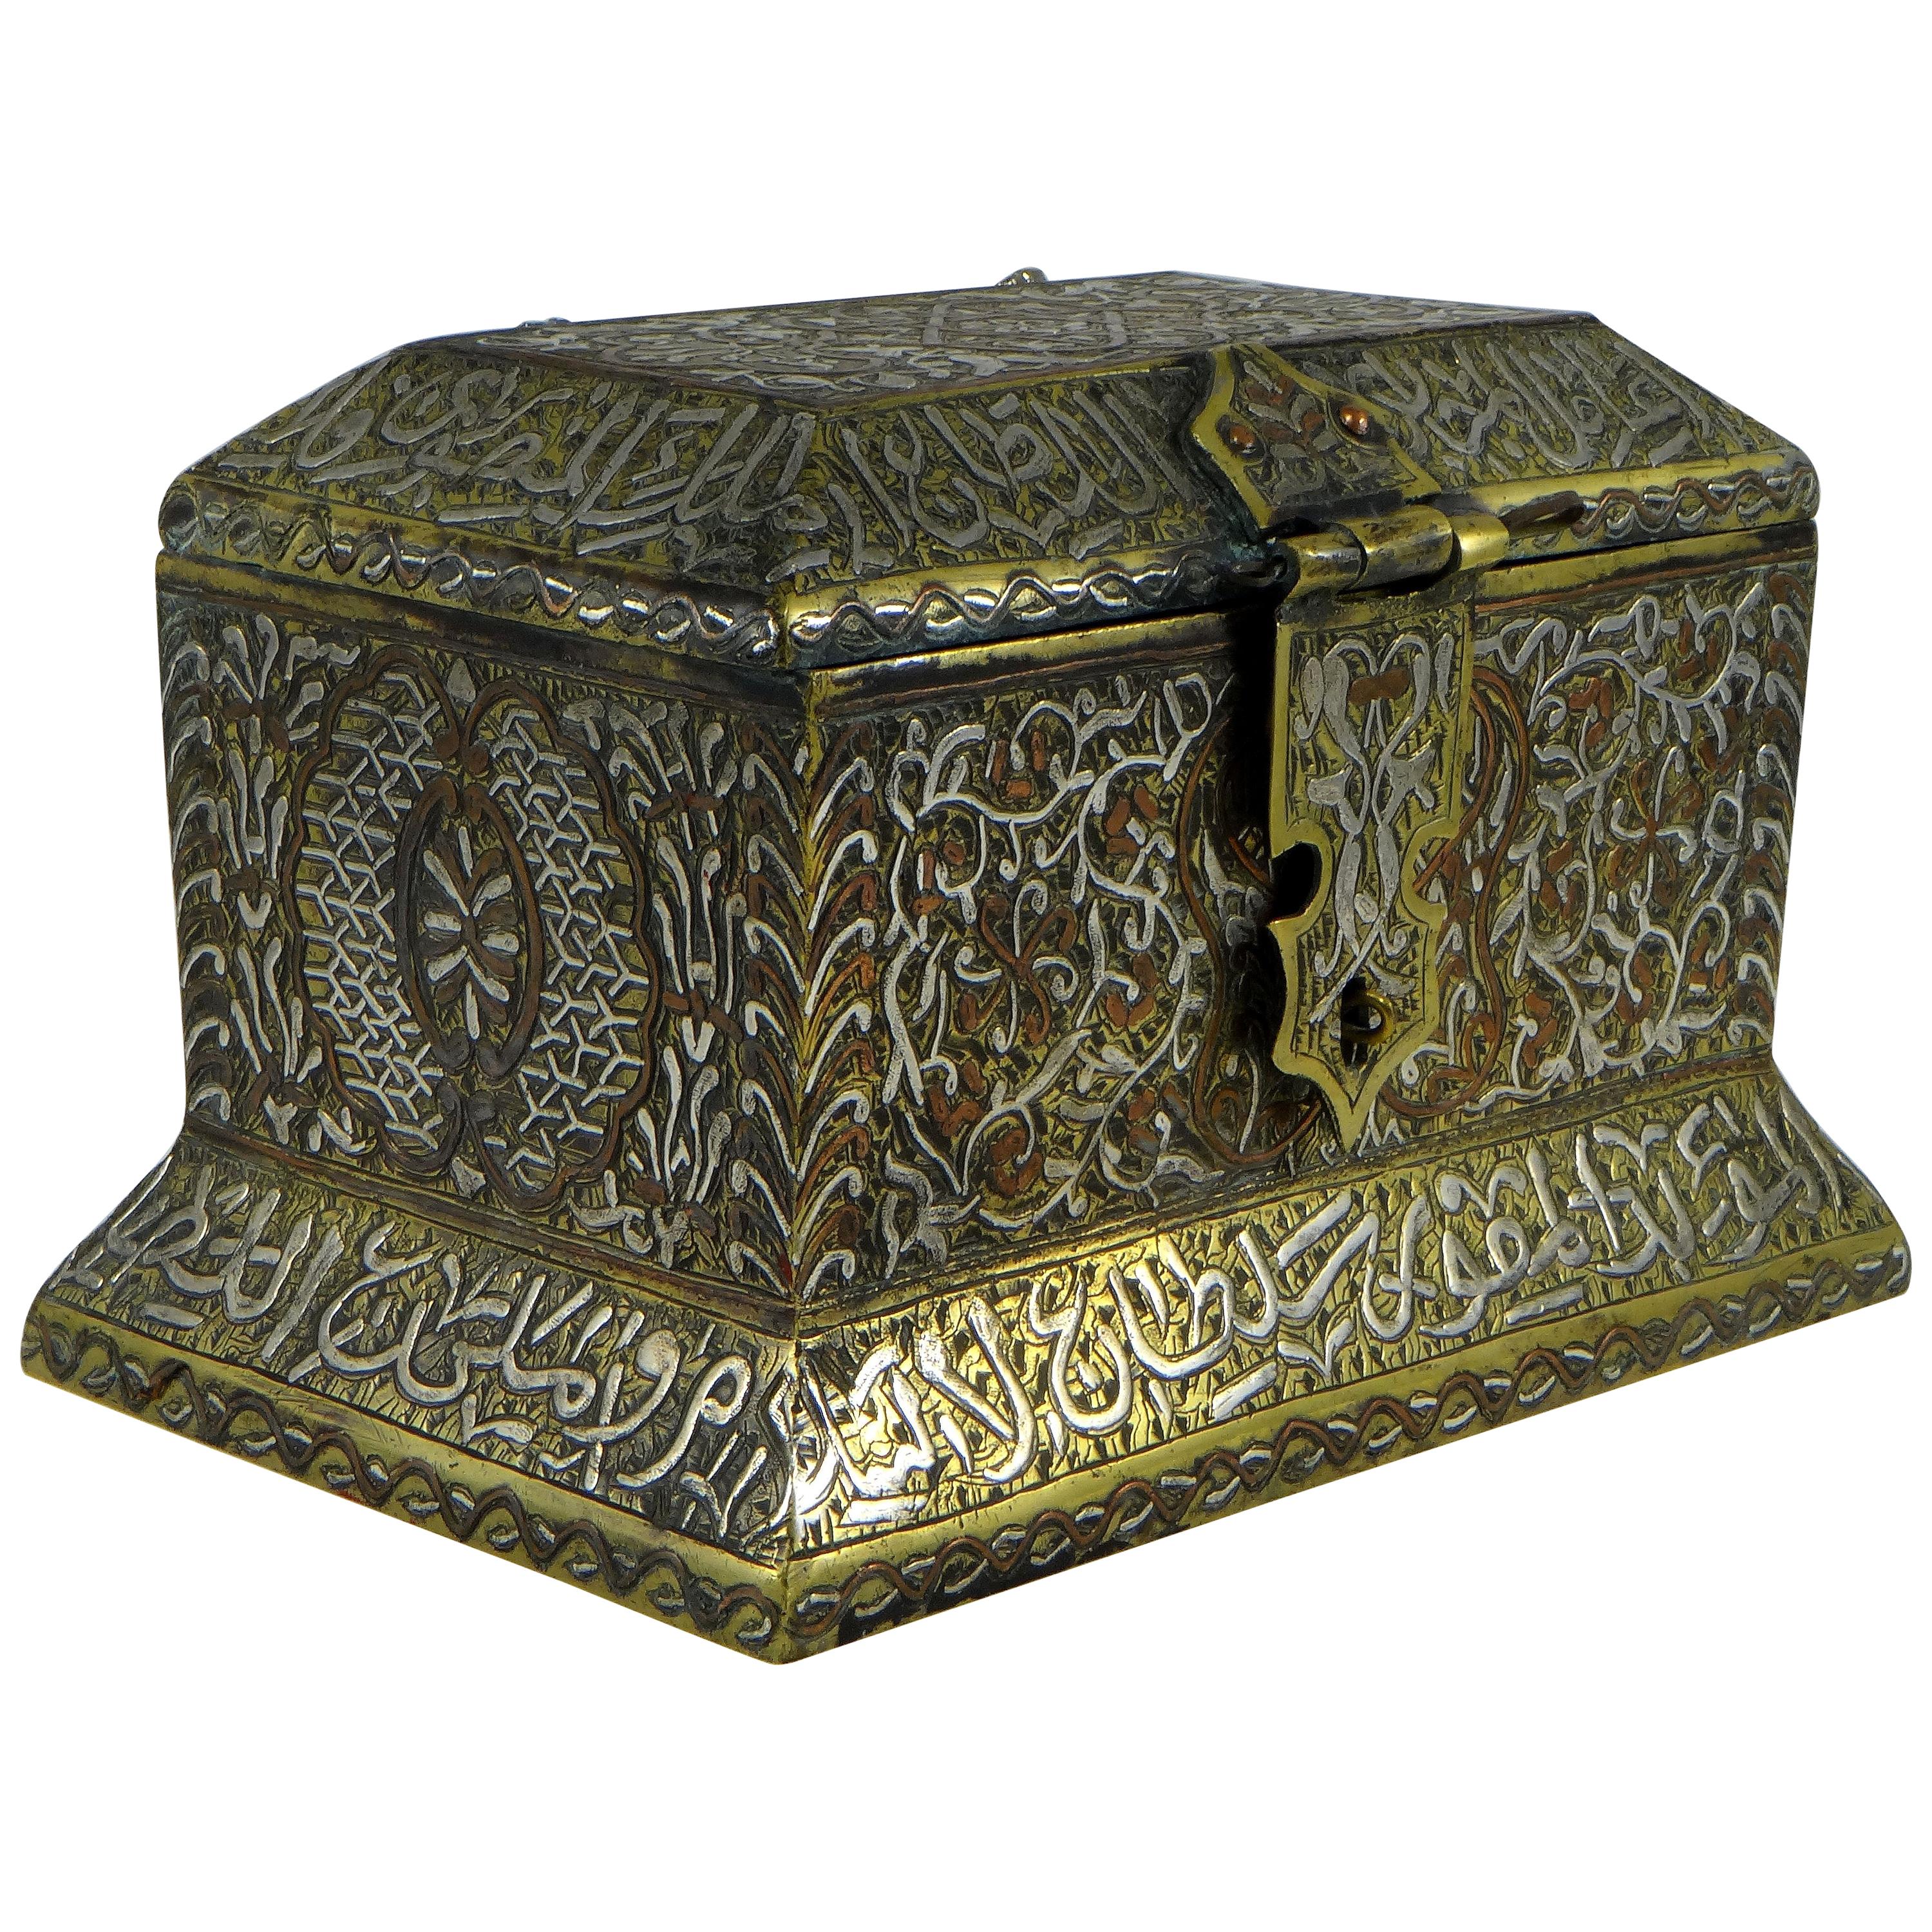 Bronze Box Inlaid with Silver and Copper, Syria, 1900s-1920s